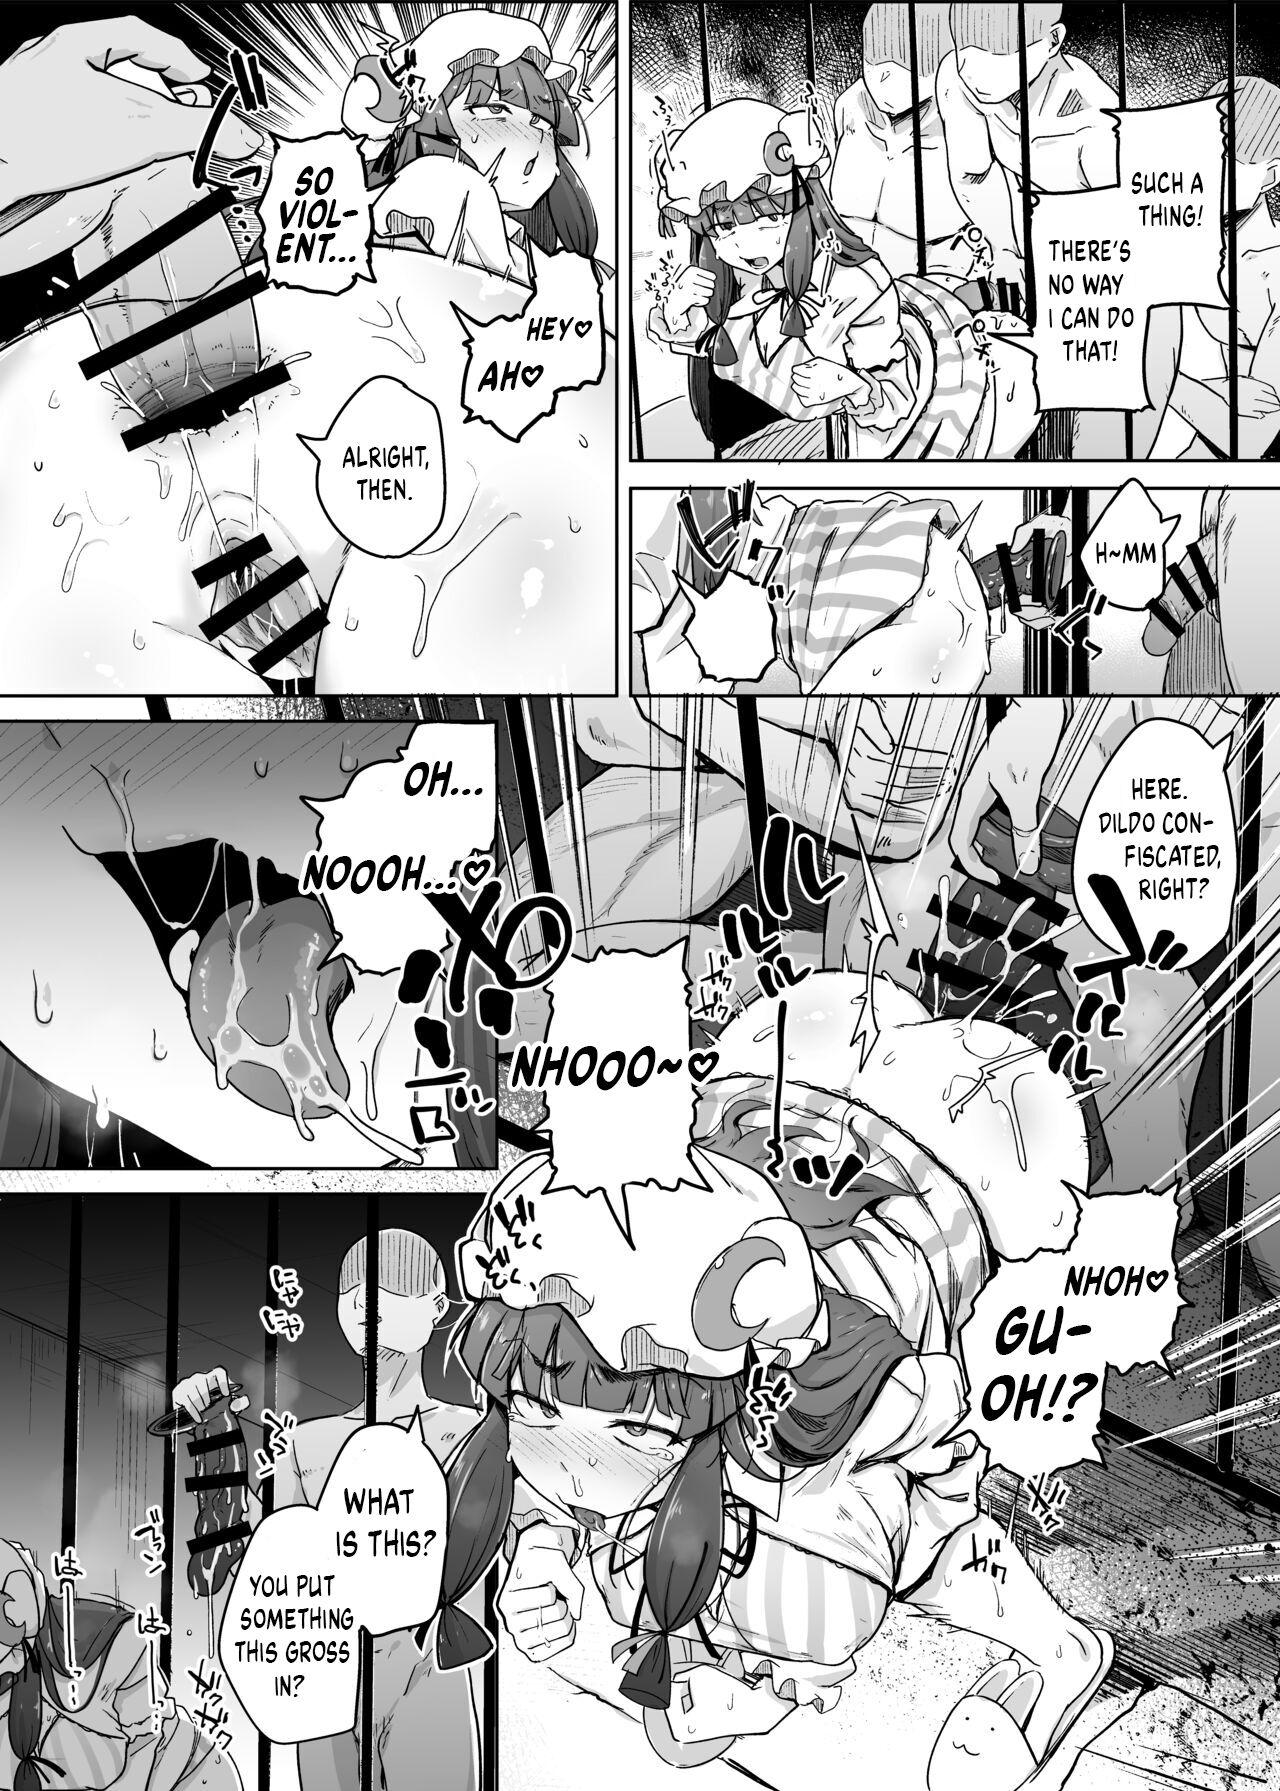 Nylon Ana to Muttsuri Dosukebe Daitoshokan 5 | The Hole and the Closet Perverted Unmoving Great Library 5 - Touhou project Porno Amateur - Page 10